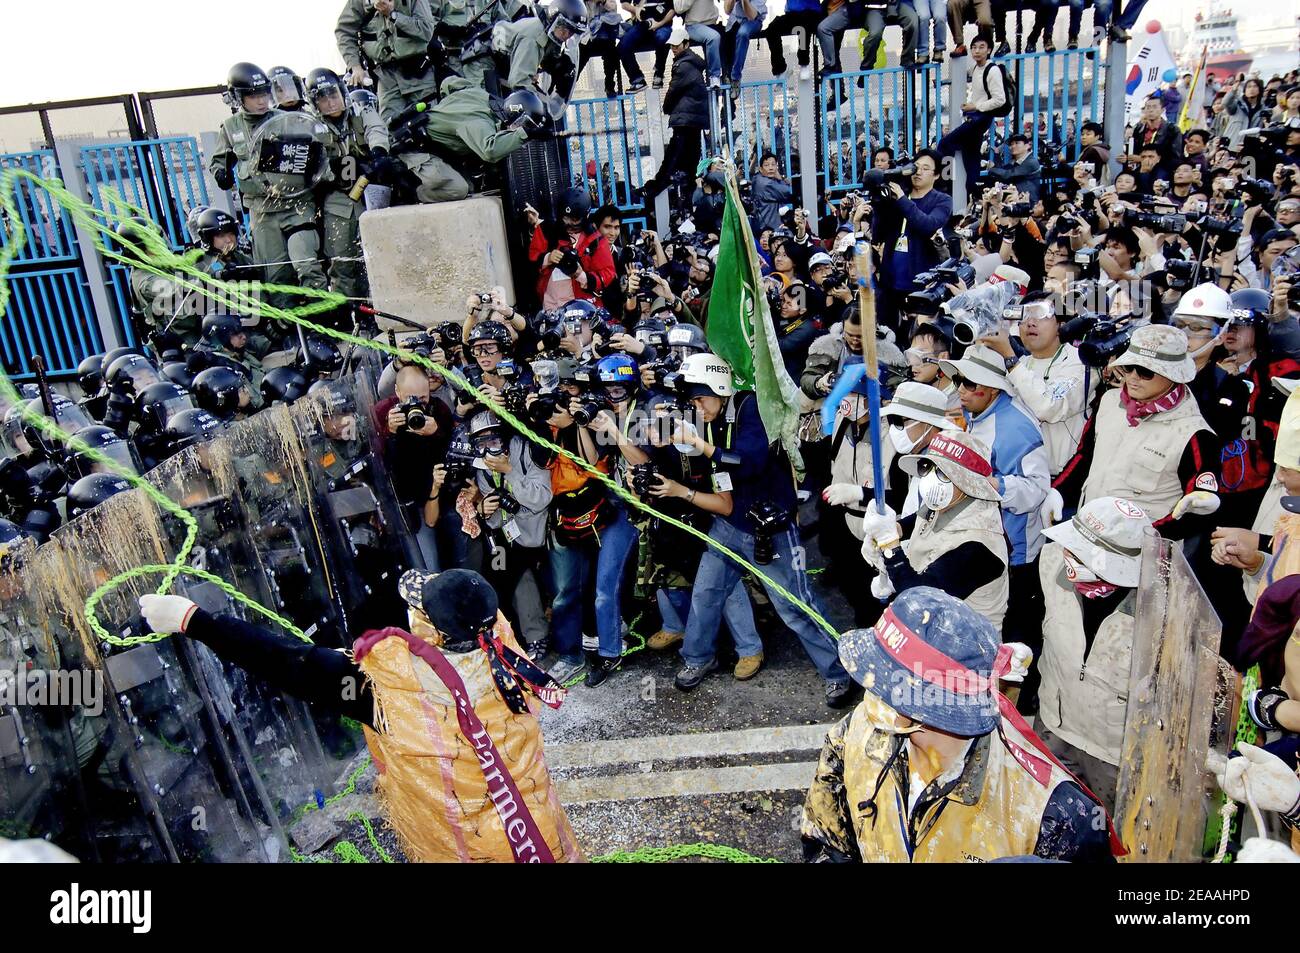 South Korean farmers clash with Hong Kong police outside the Hong Kong Convention Centre where delegates are meeting at the sixth Ministerial Conference of the World Trade Organization on December 17, 2005. The South Koreans have been prominent among demo Stock Photo